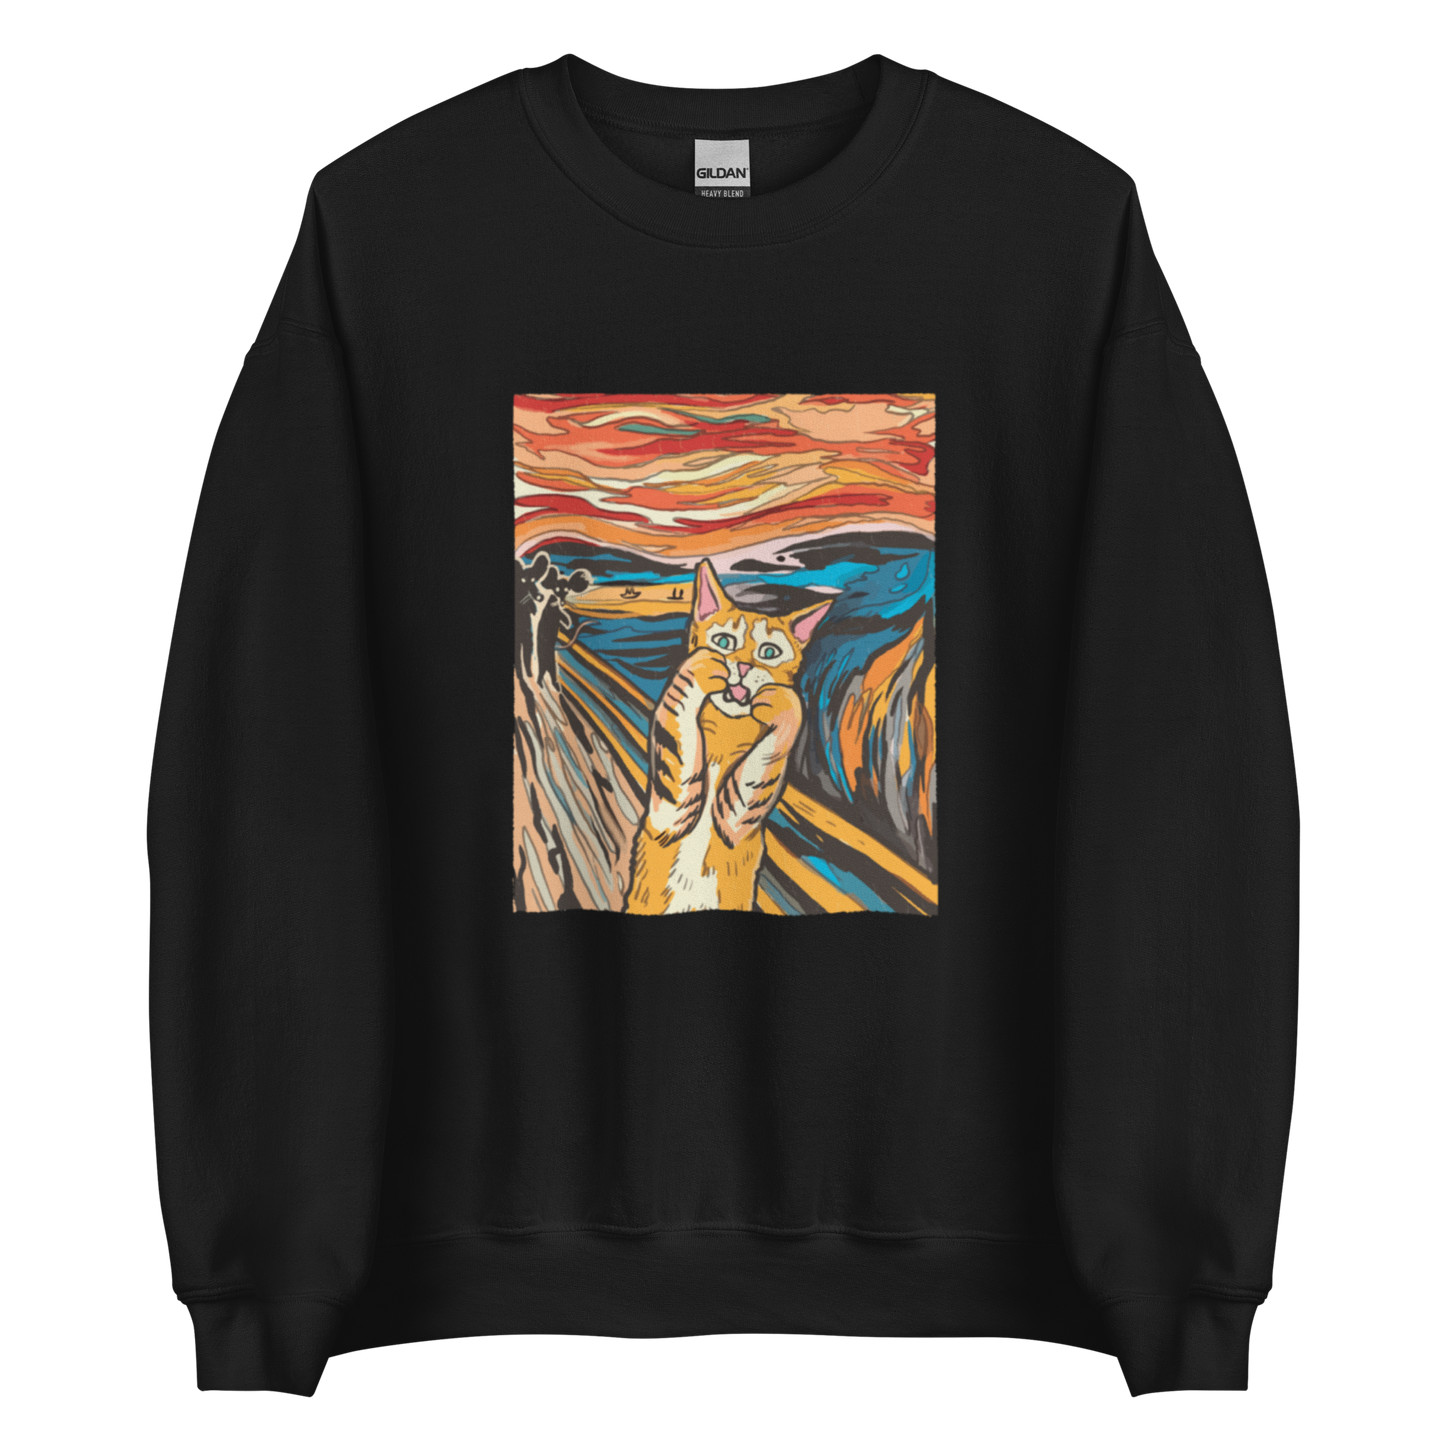 Black Screaming Cat Sweatshirt featuring an Edvard Munch's 'The Scream' graphic on the chest - Funny Graphic Cat Sweatshirts - Boozy Fox